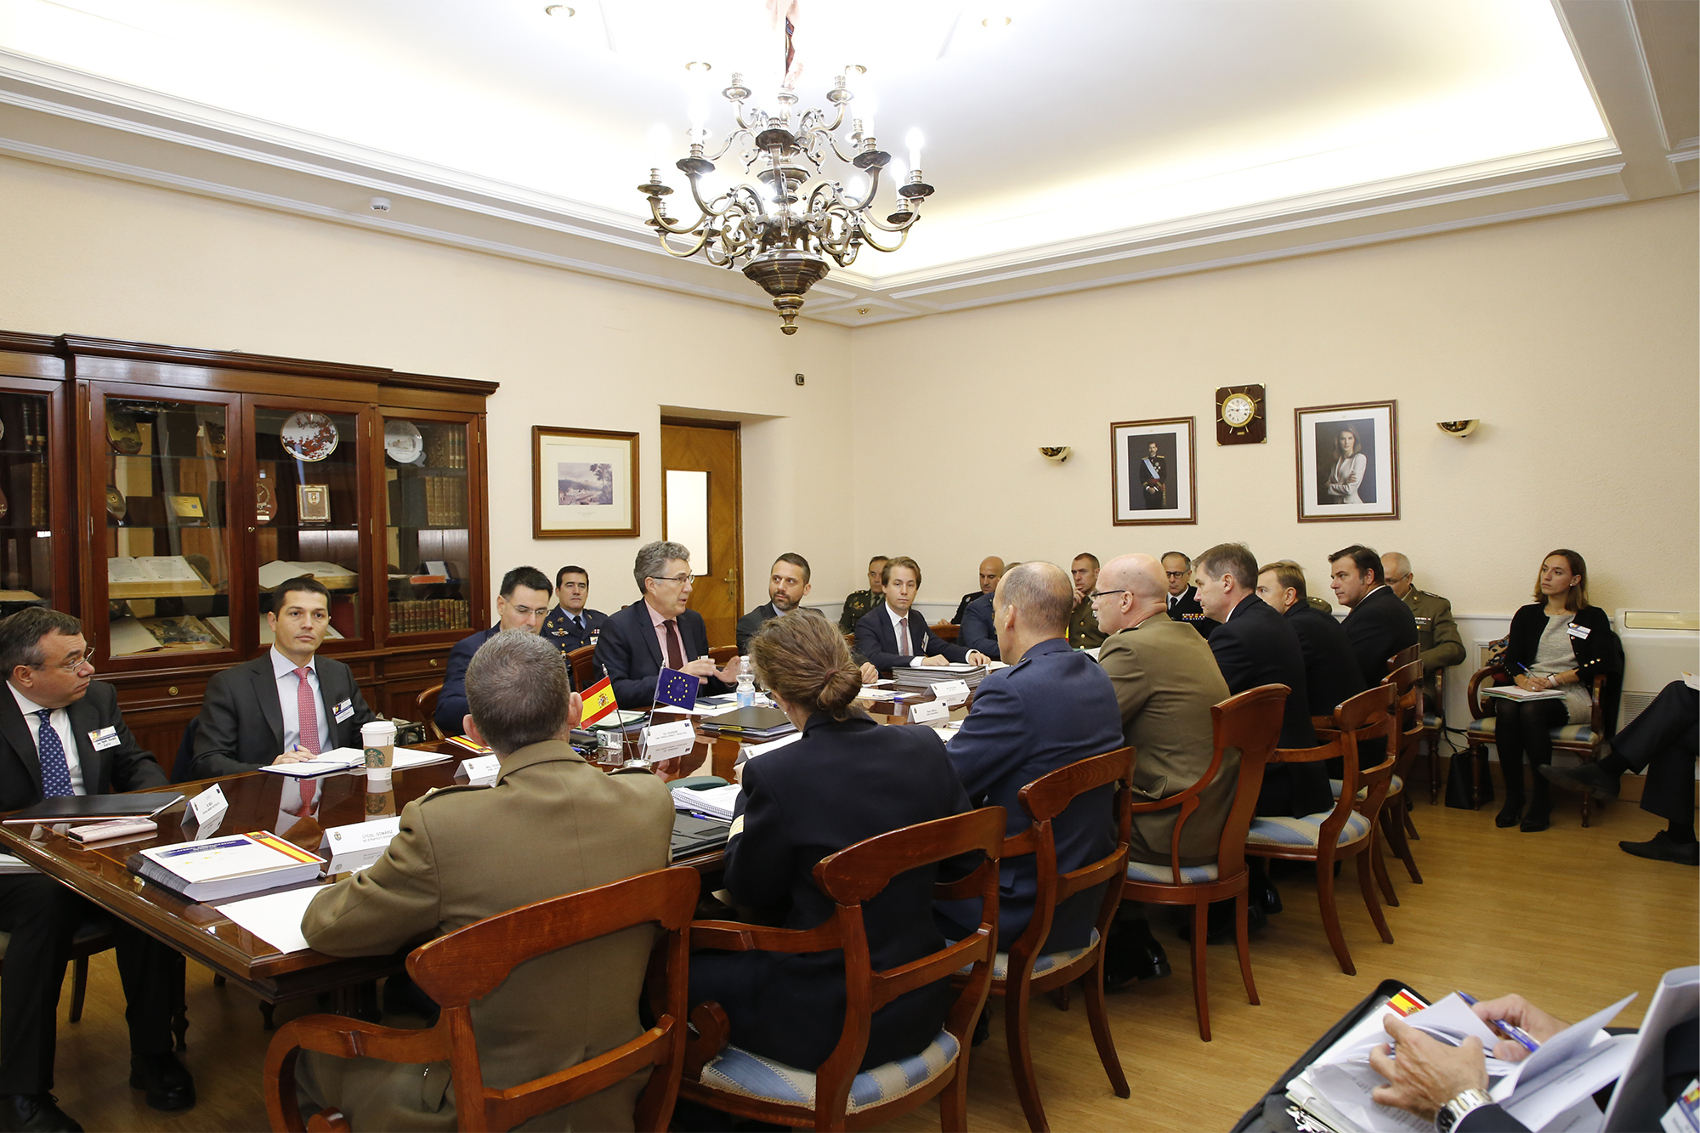 Joint Chiefs of Staff organise a bilateral meeting with European Union representatives